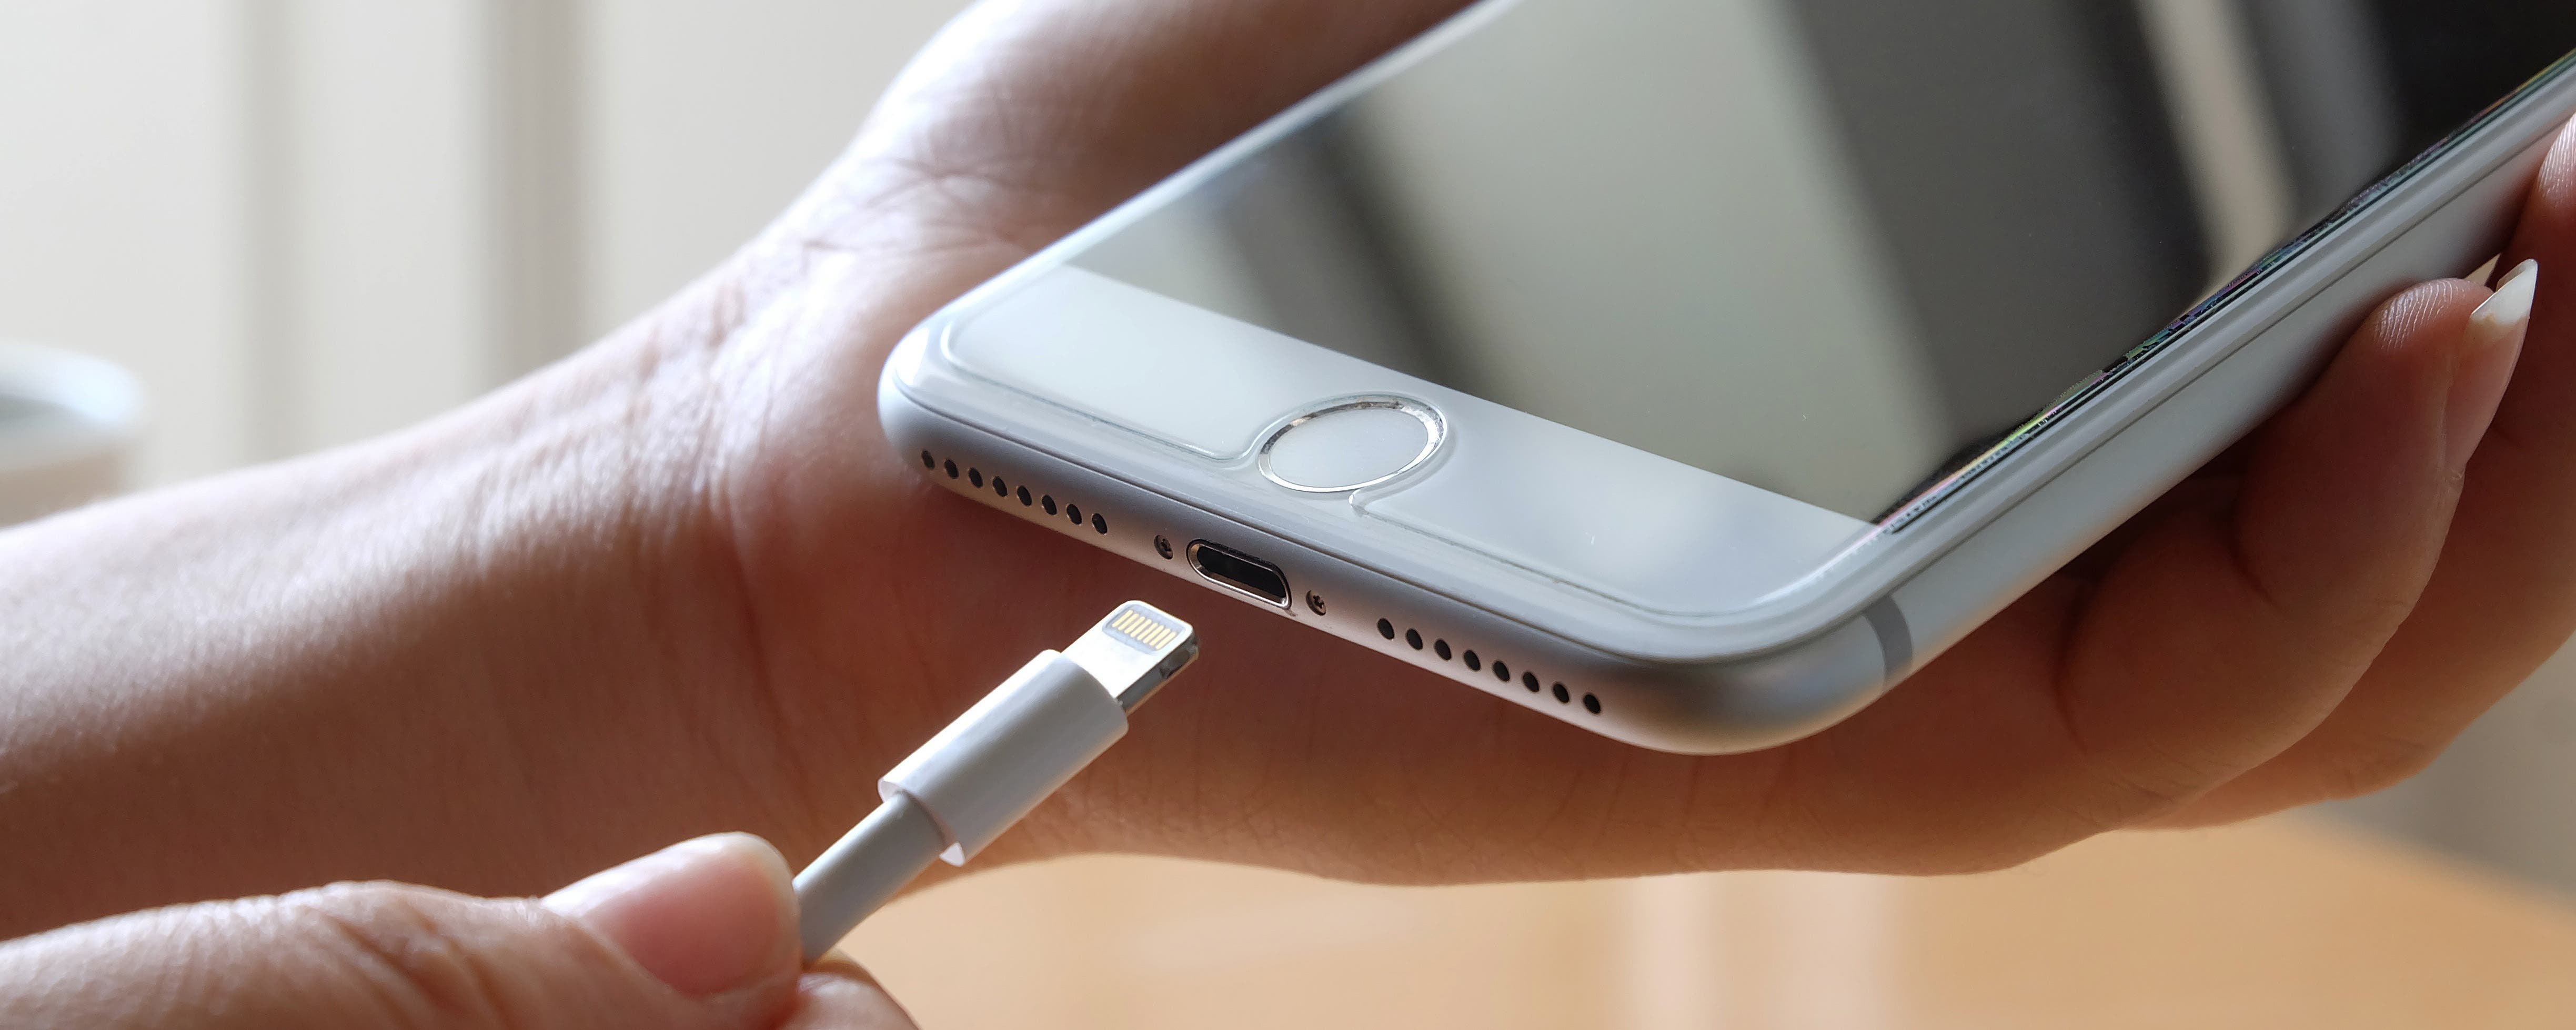 How to Tell If Your iPhone Is Charging When It's On or Off